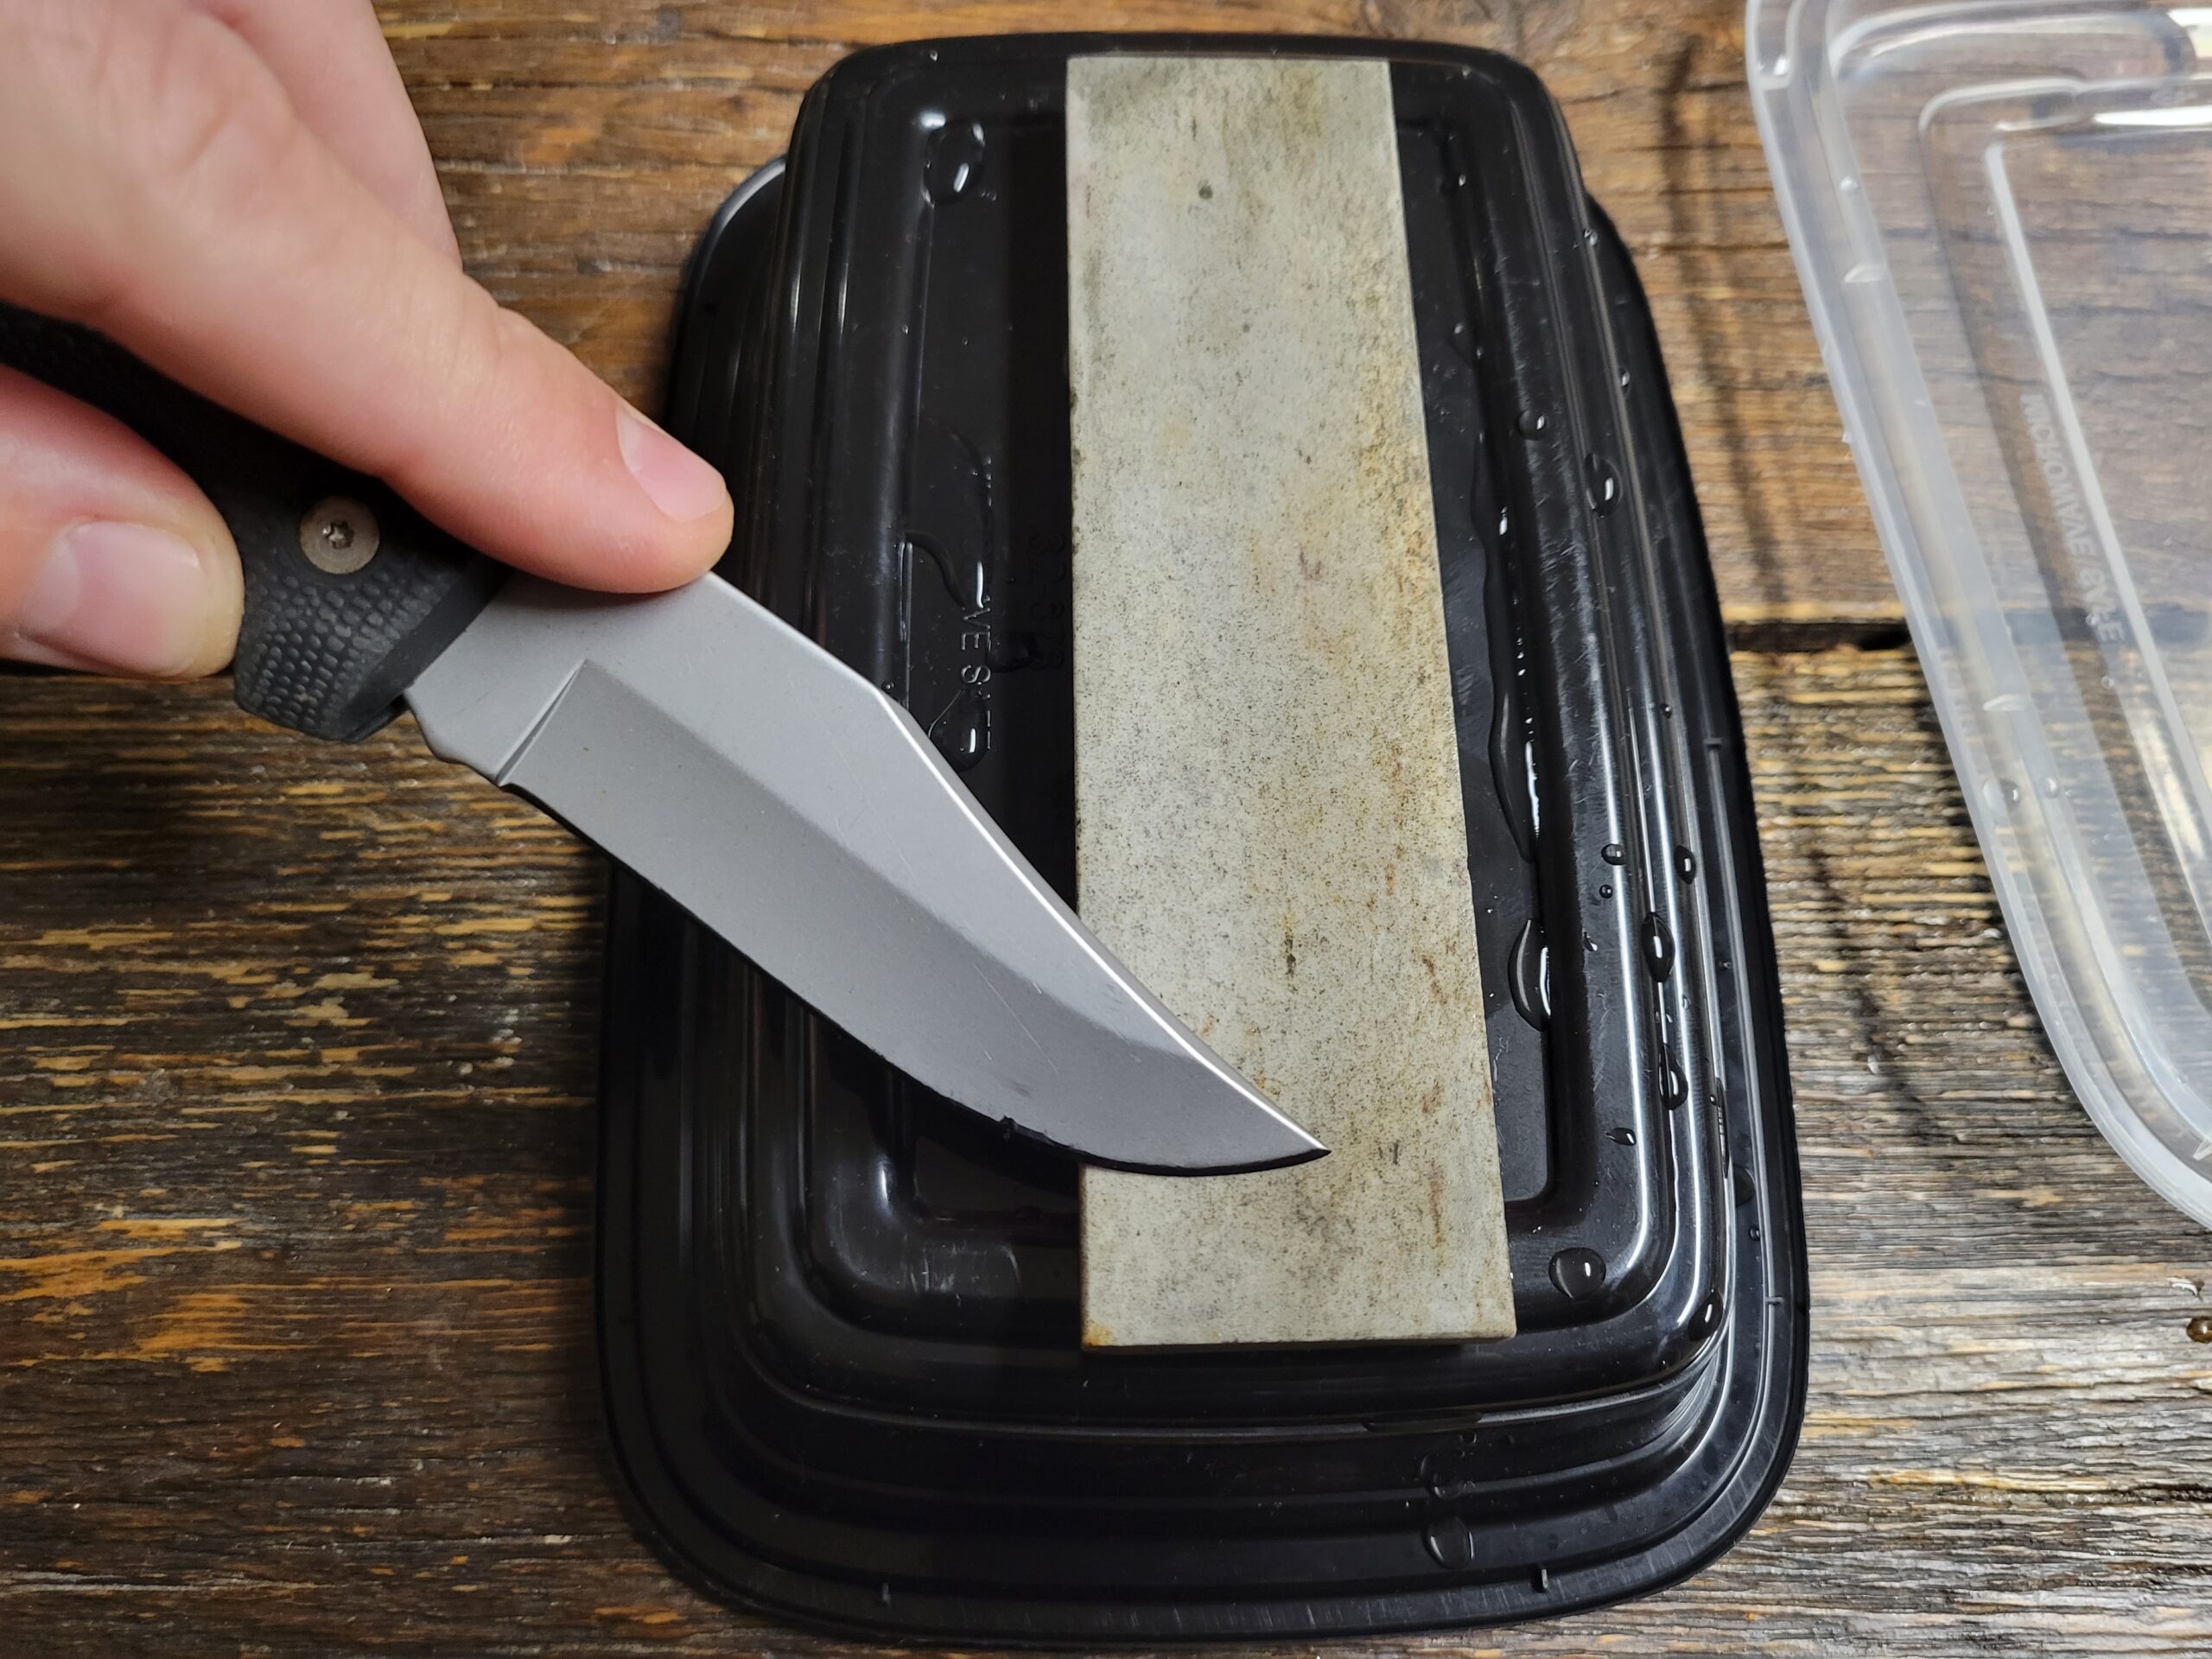 Reviews and Ratings for Smith's Edge Pro Compact Electric Knife